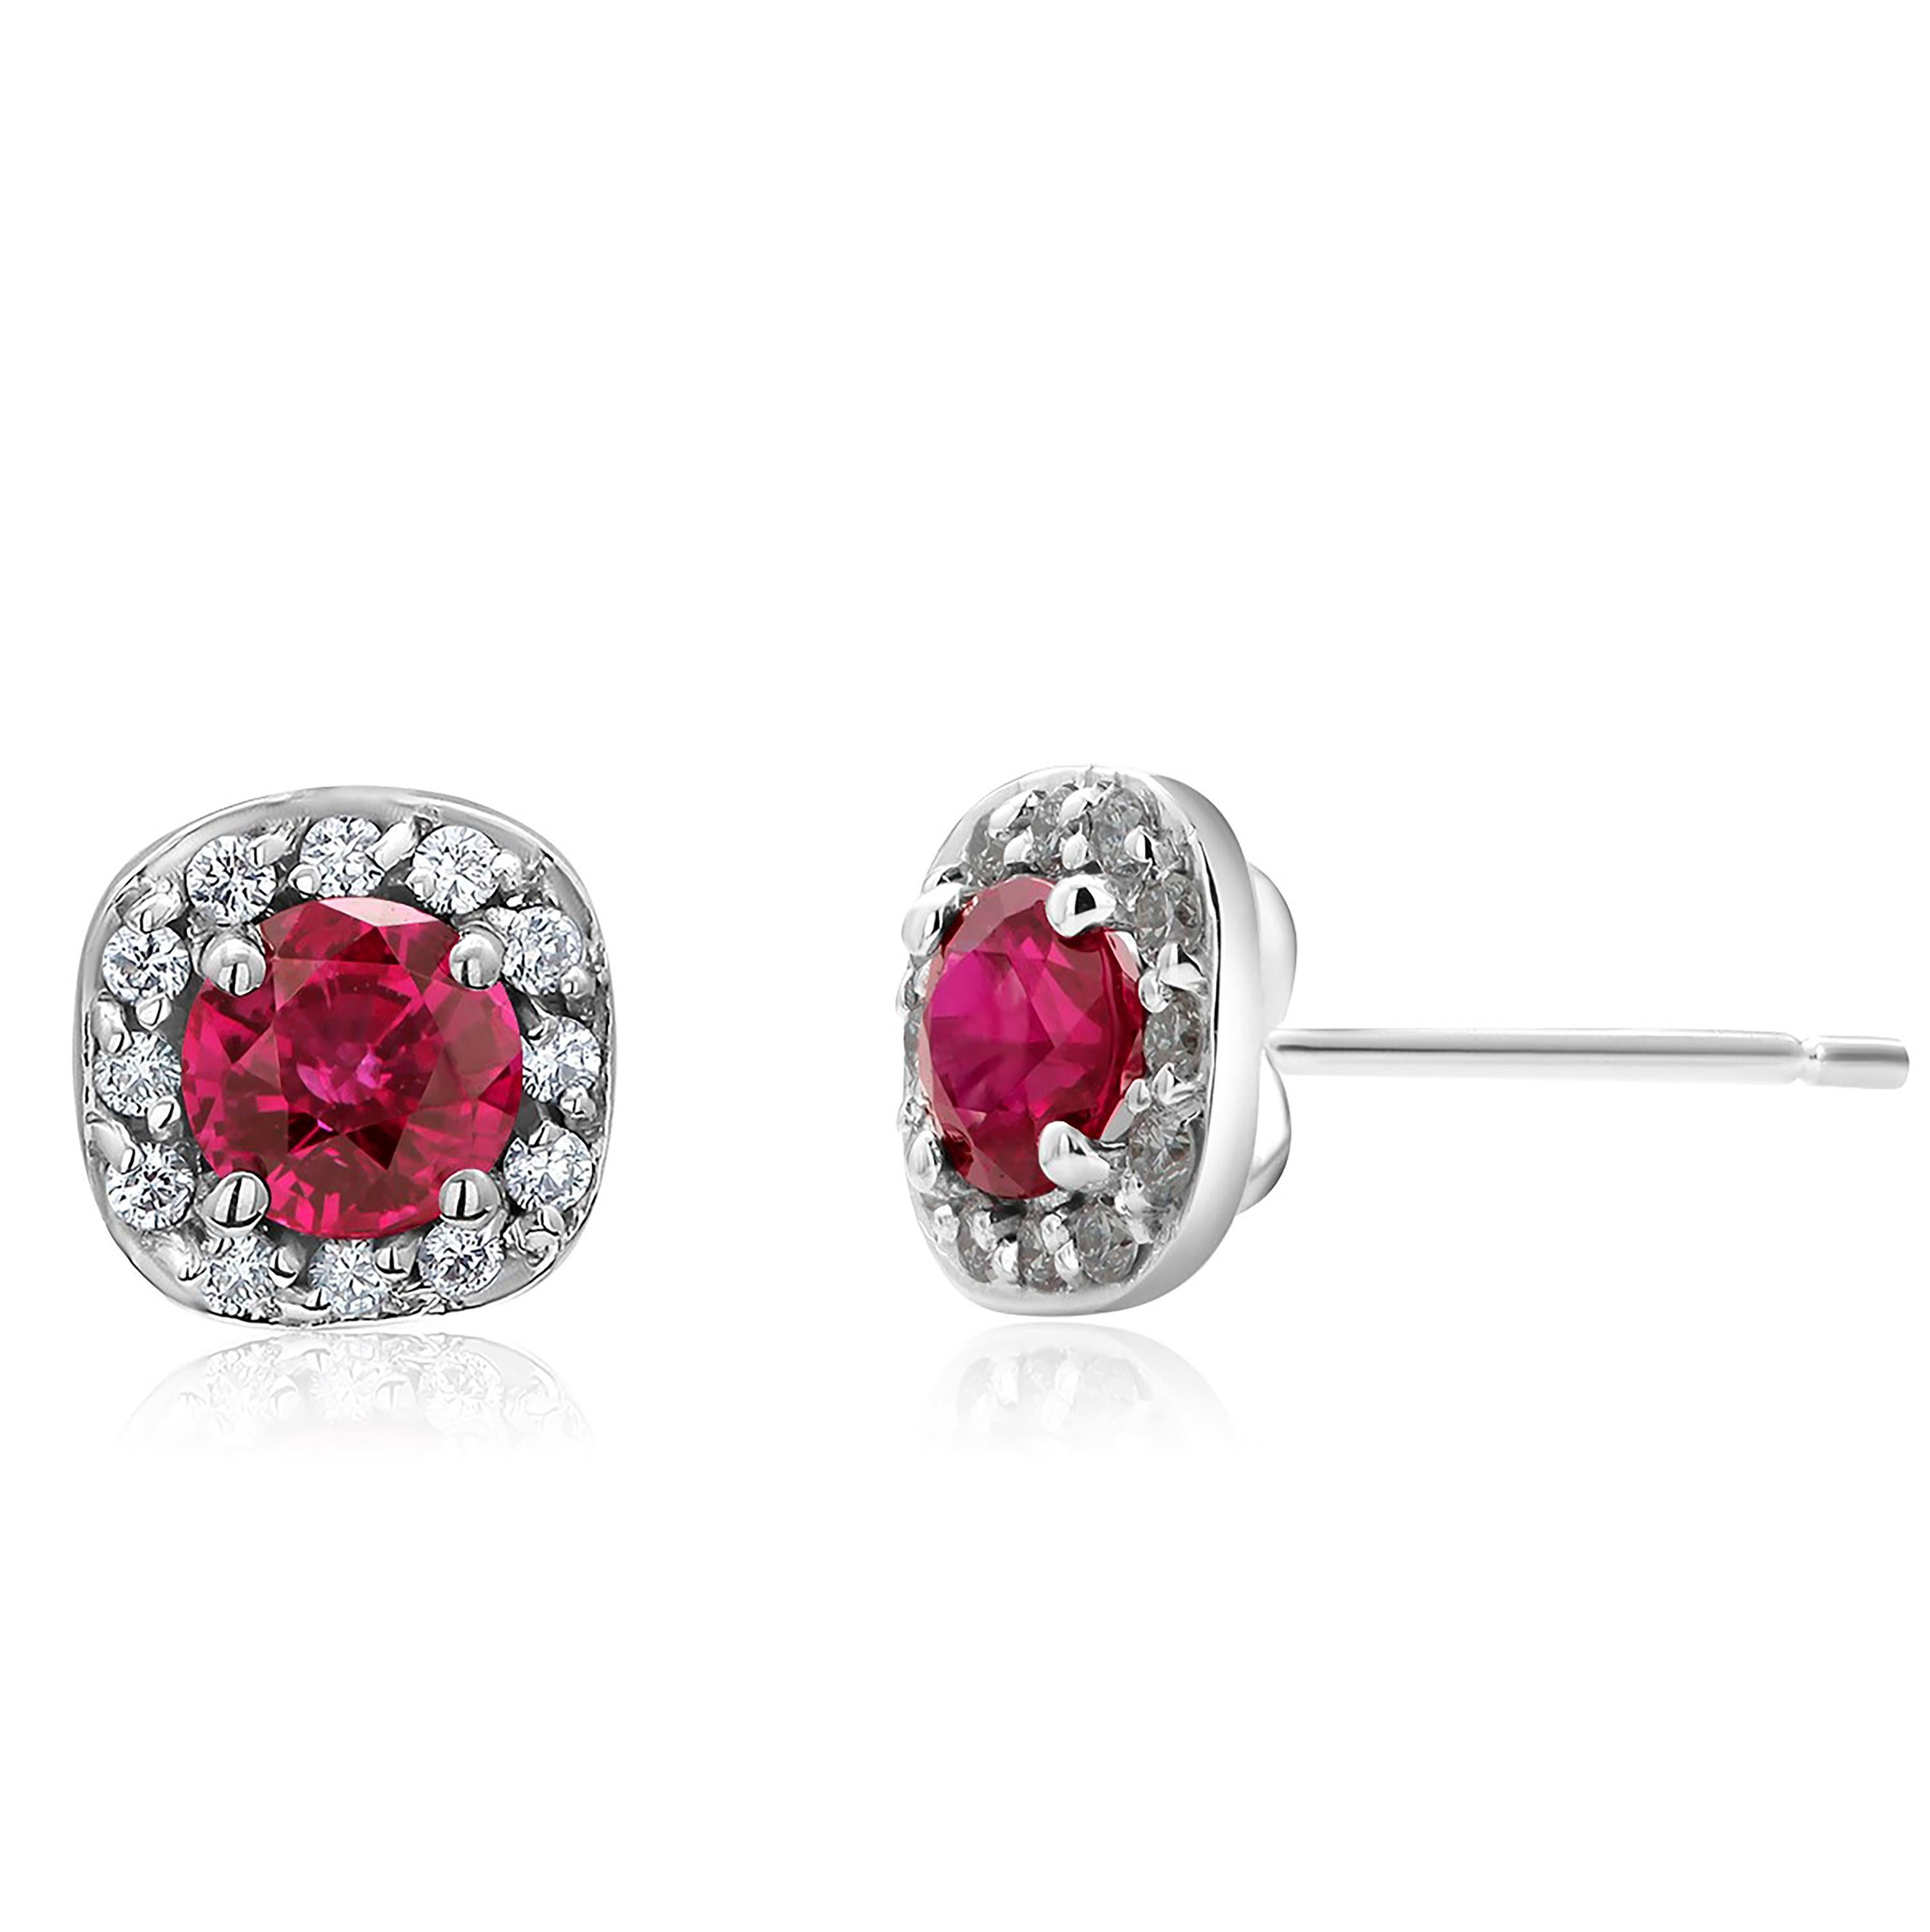 Contemporary Burma Ruby and Diamond 1.35 Carat White Gold Square Shaped Halo Stud Earrings